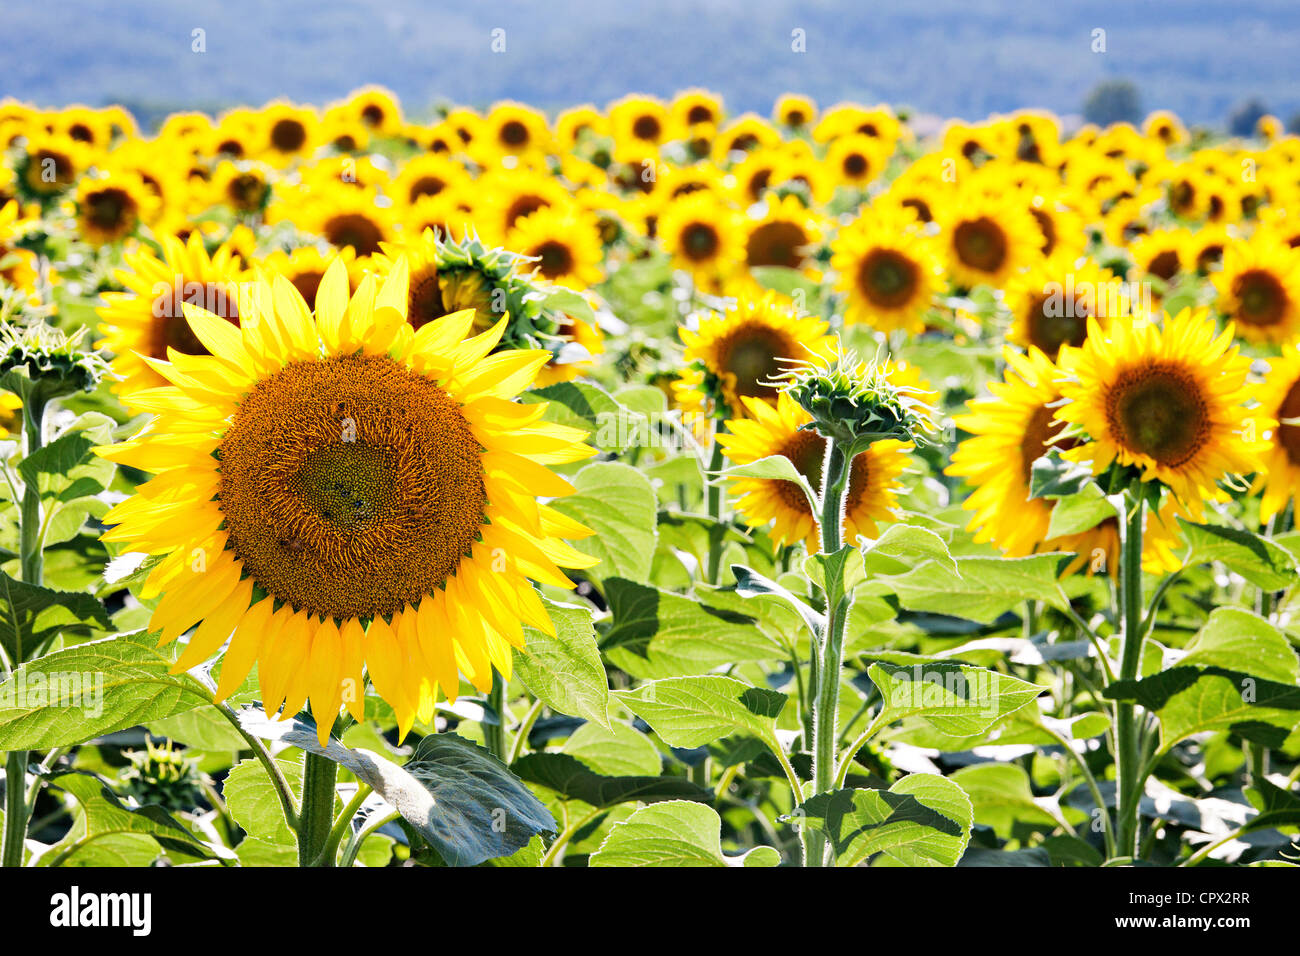 Field of sunflowers, close up Stock Photo